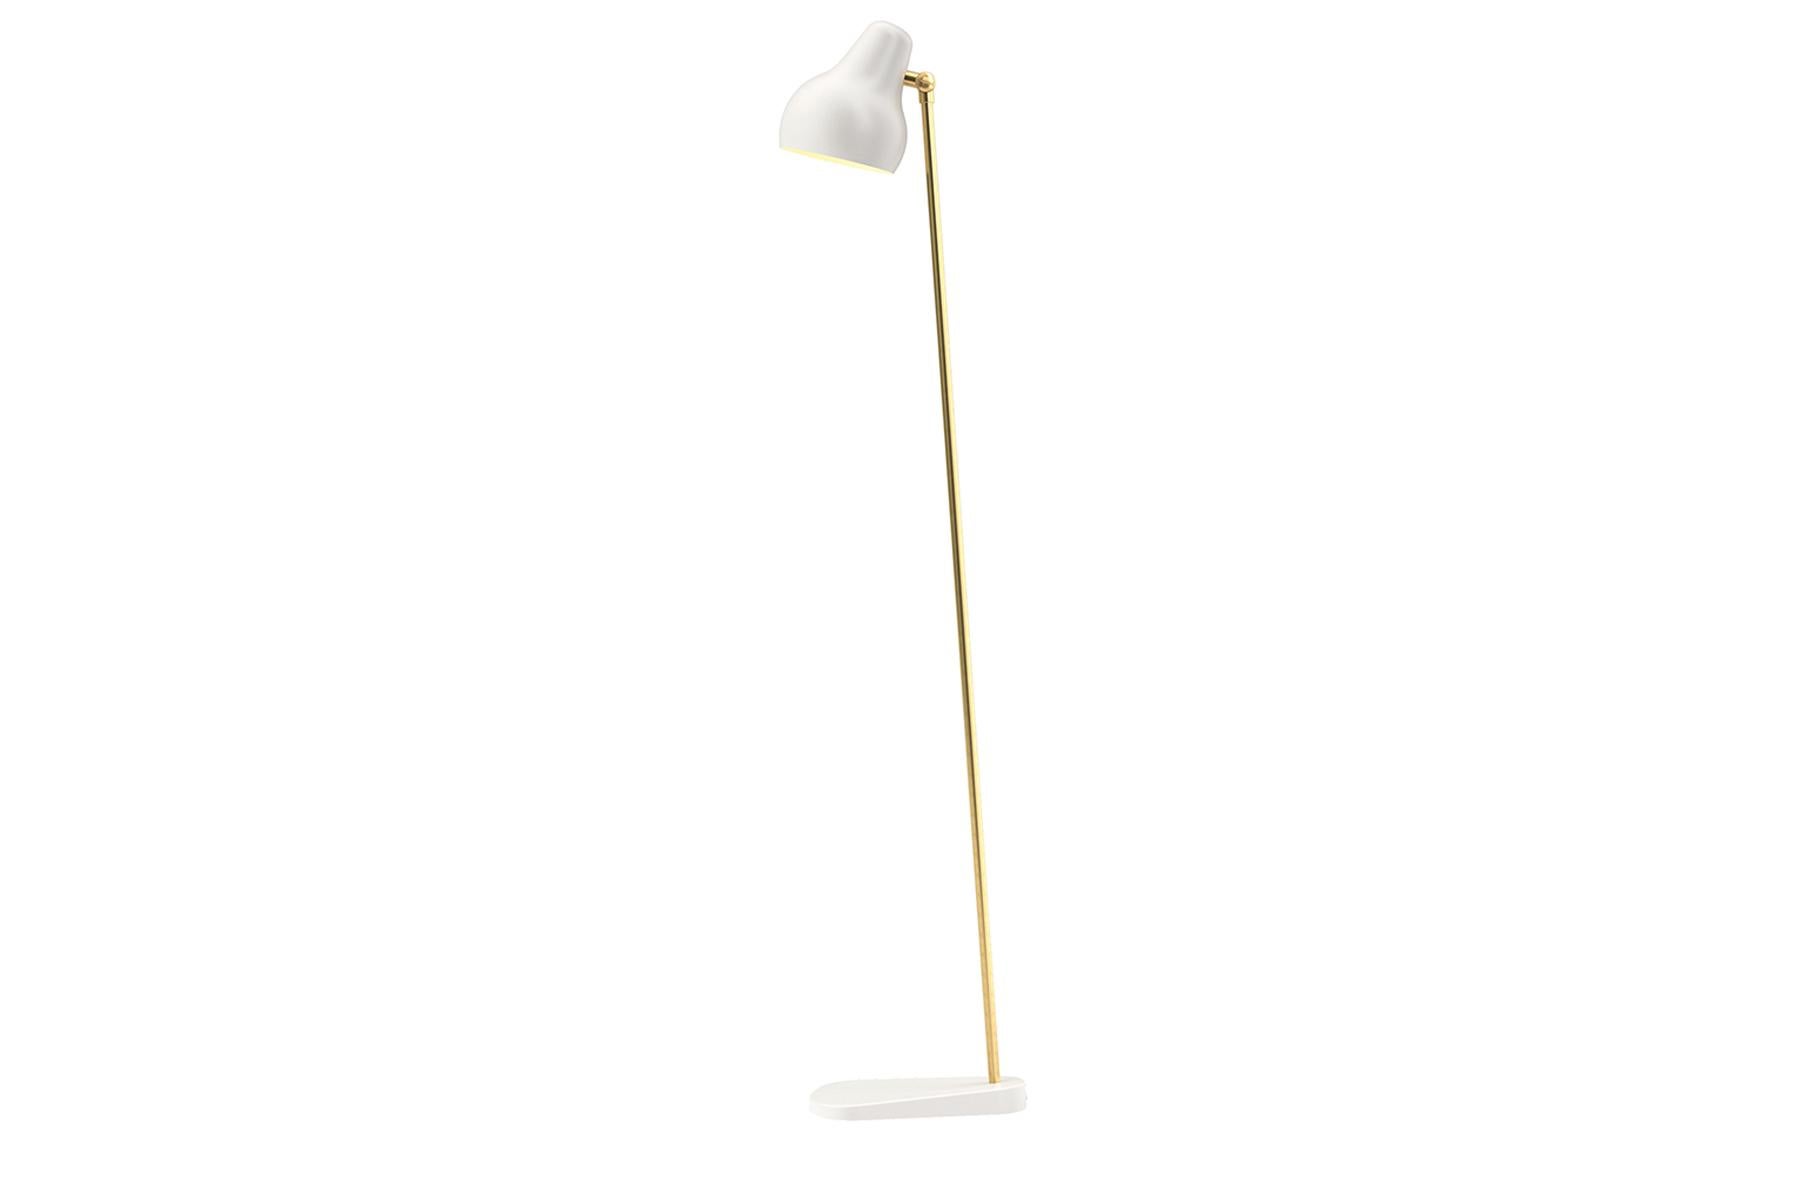 The fixture emits downward directed light. The angle of the shade can be adjusted to optimize light distribution. The shade is painted white on the inside to ensure a soft comfortable light. VL38 floor lamp is based on the original design of the